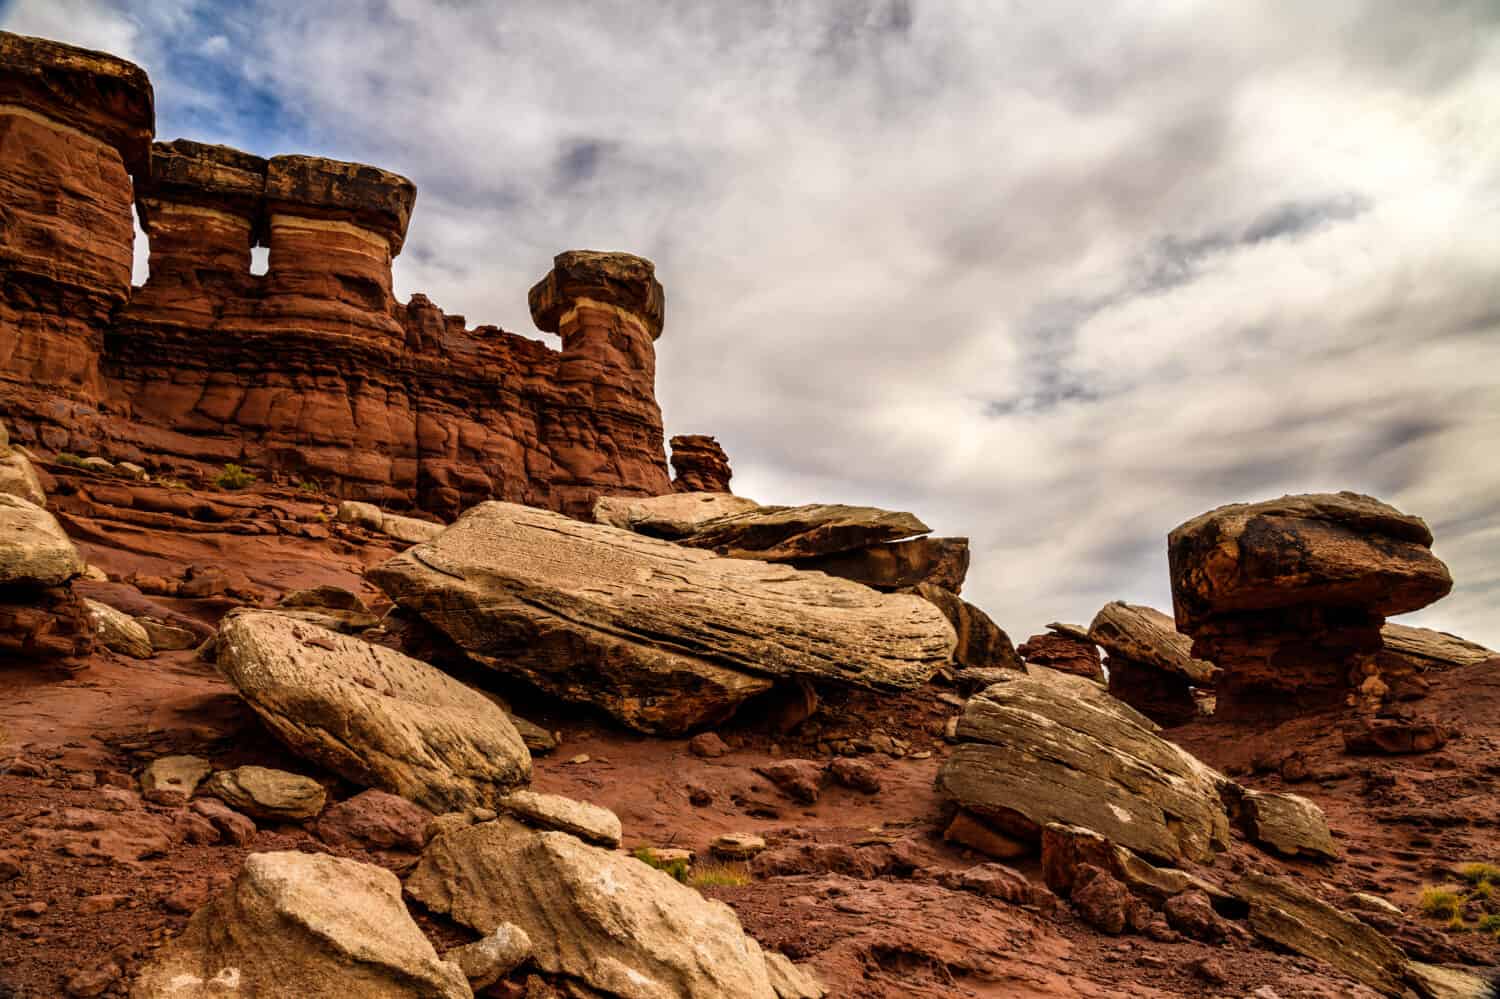 The formations on the Maze Overlook Trail in the Canyonlands National Park are massive and breathtaking.